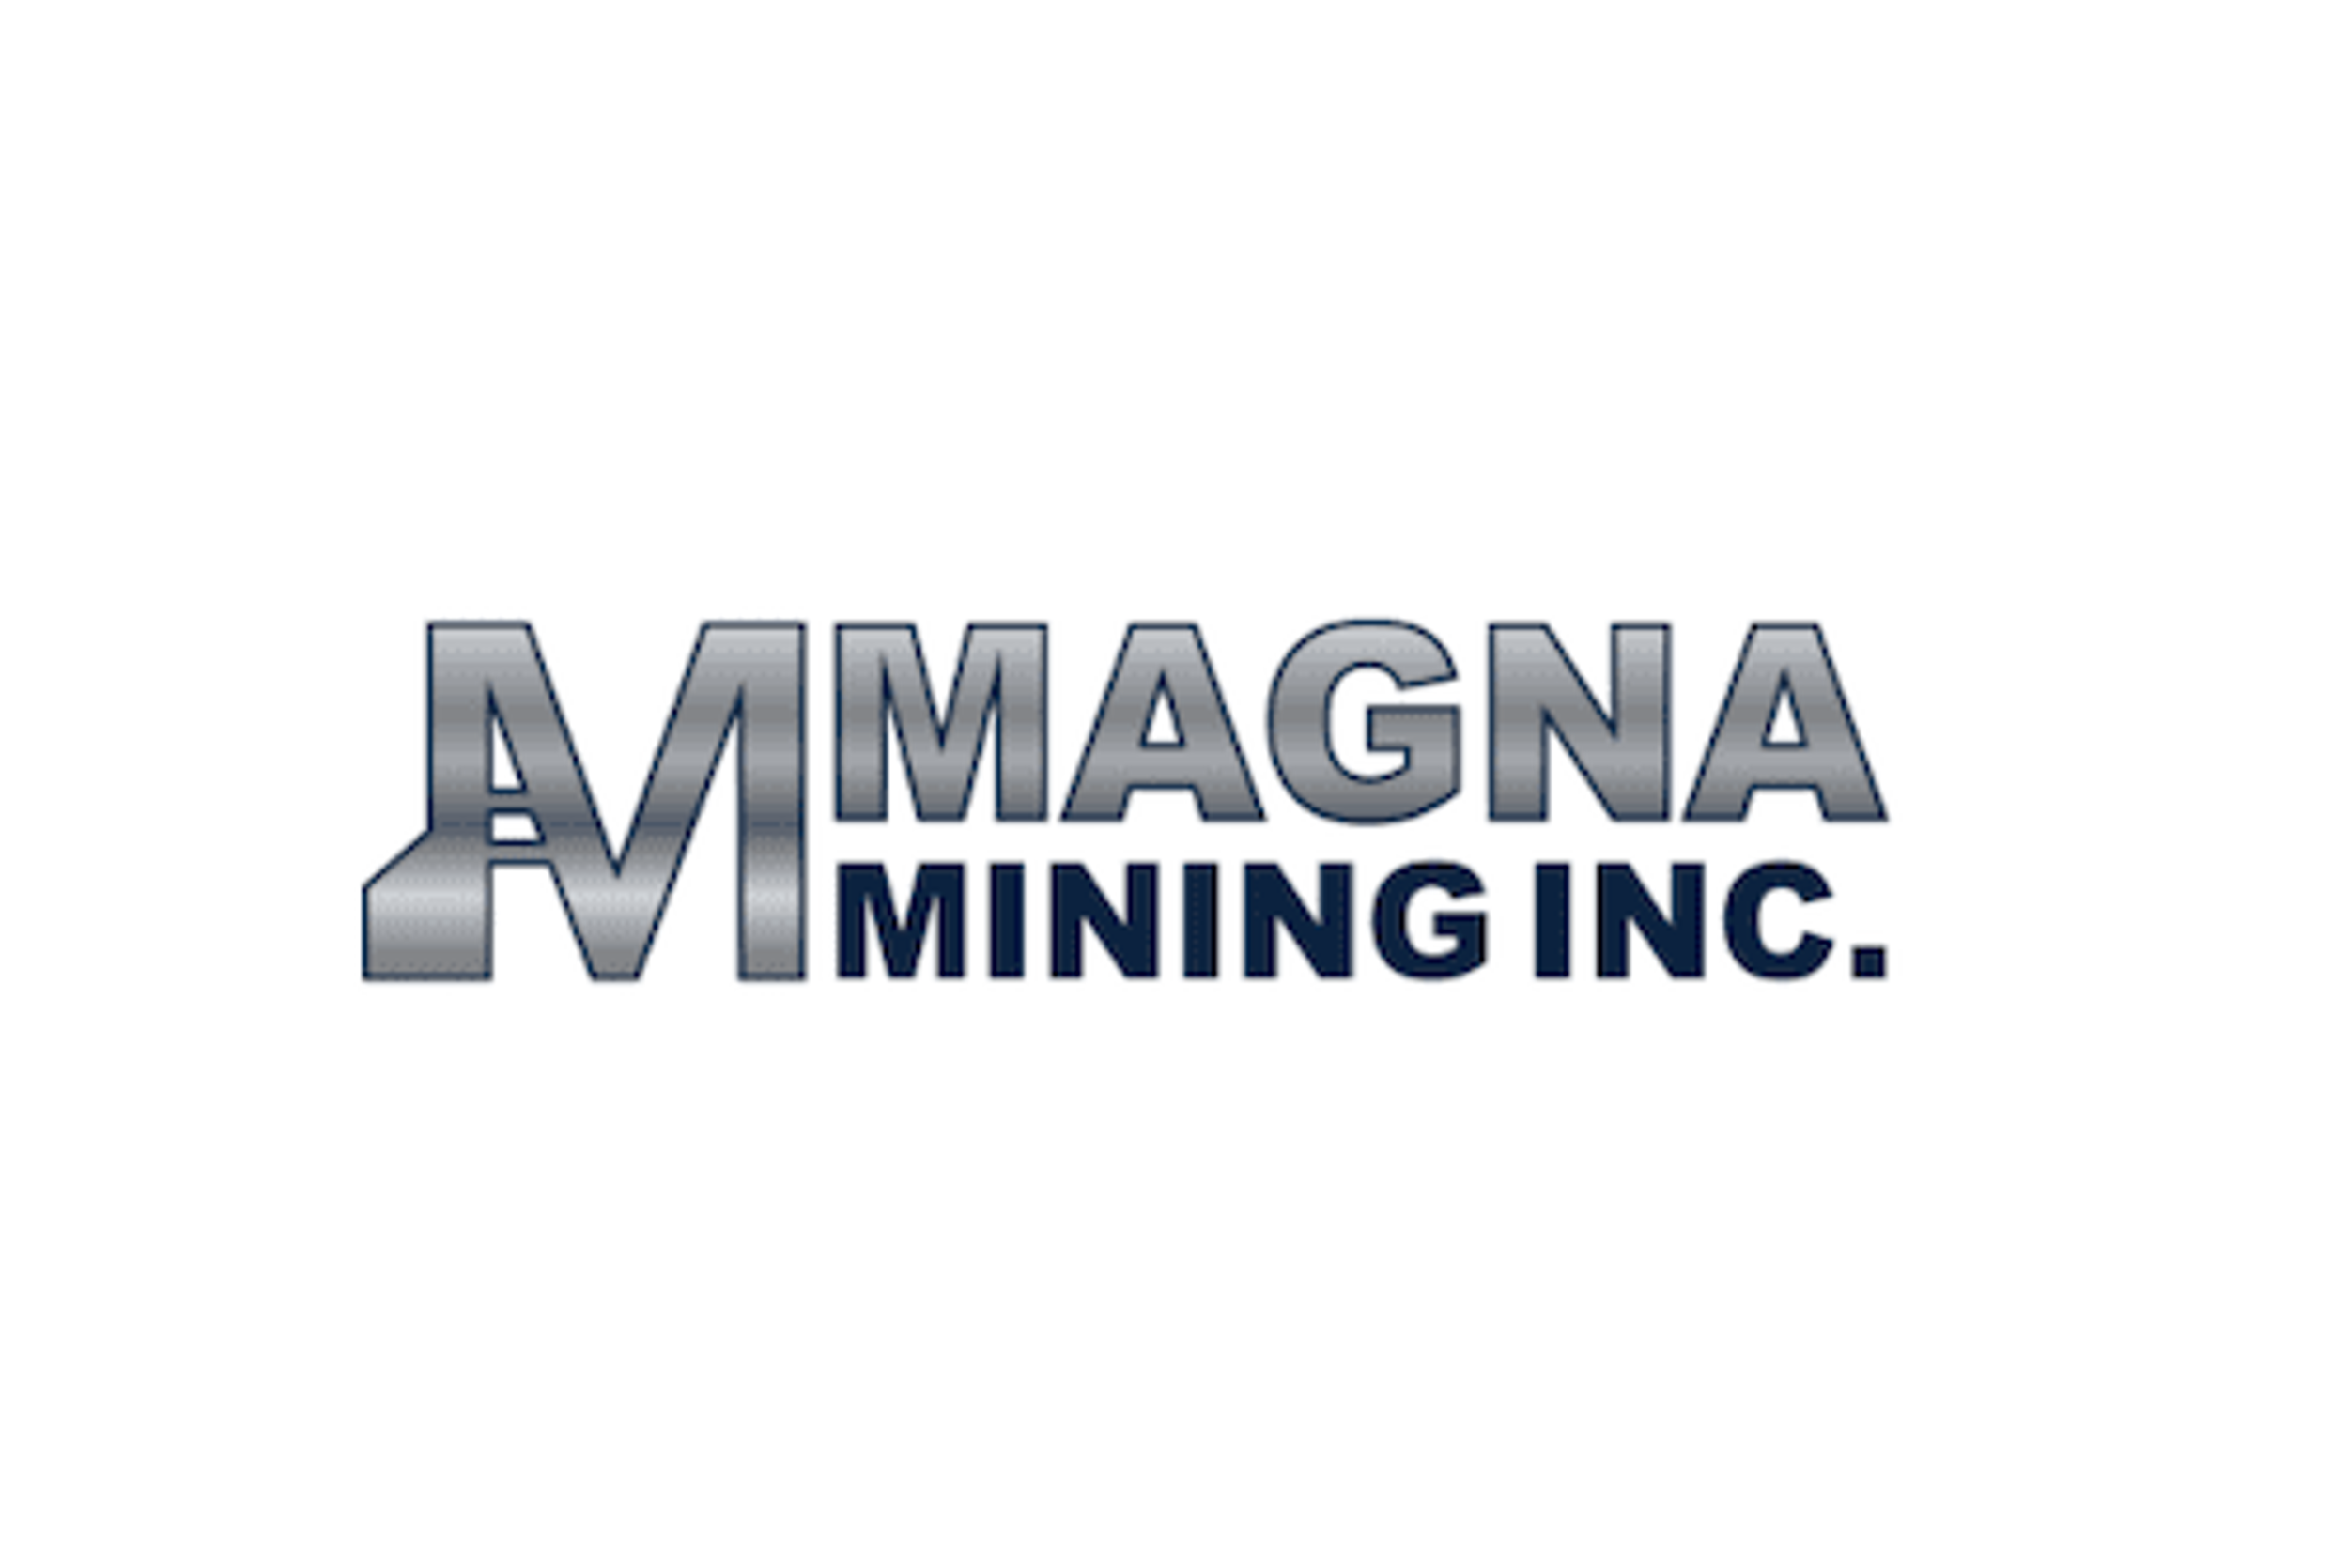 Magna Mining Inc's Shakespeare Nickel Project Feasibility Study Demonstrates Positive Economics and Carbon Neutral Nickel Mining Operation